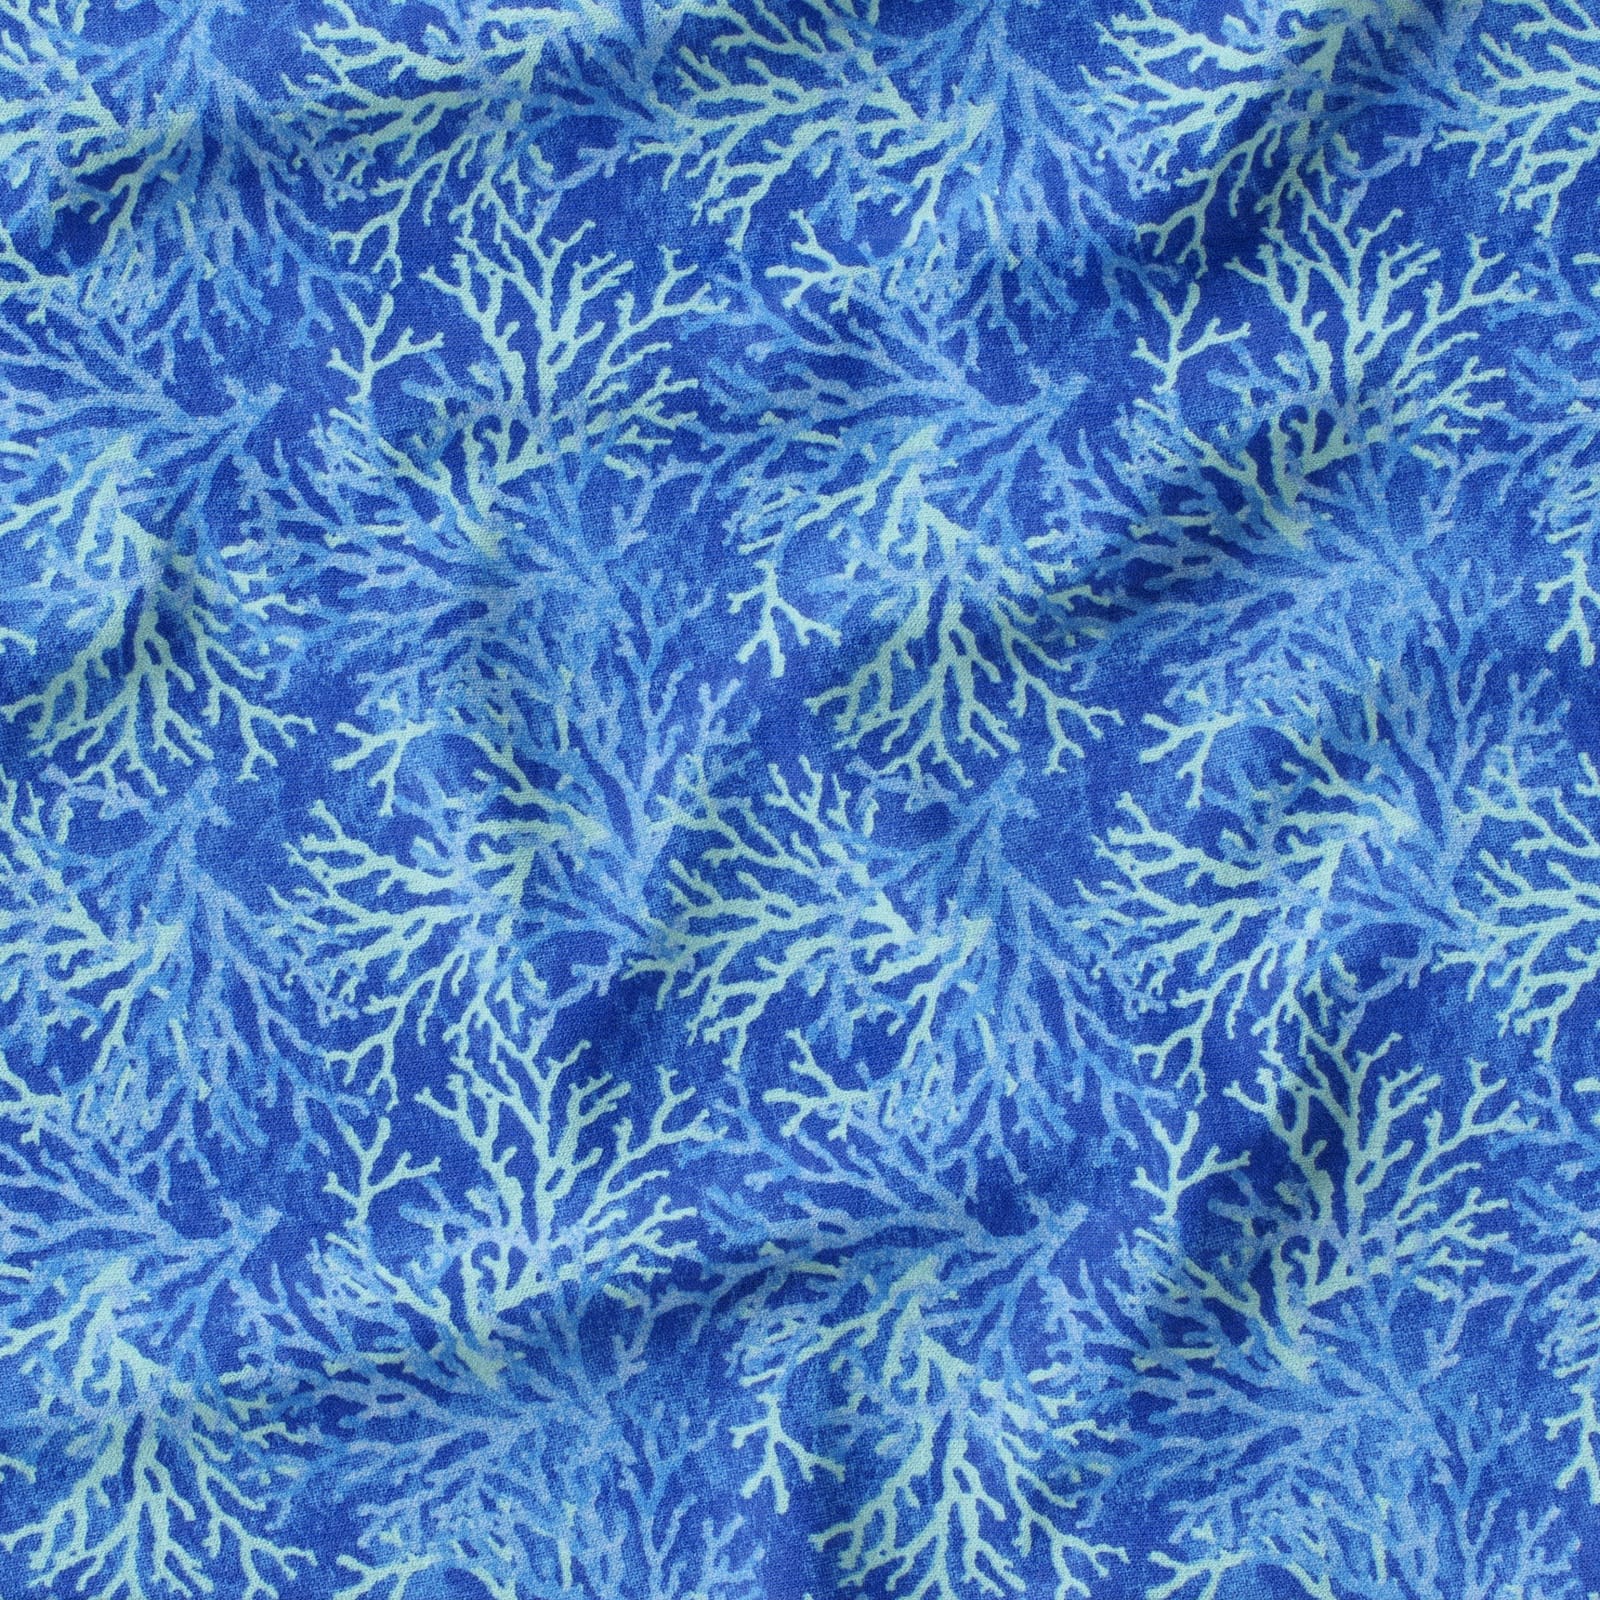 Coral Blue Novelty Cotton Fabric